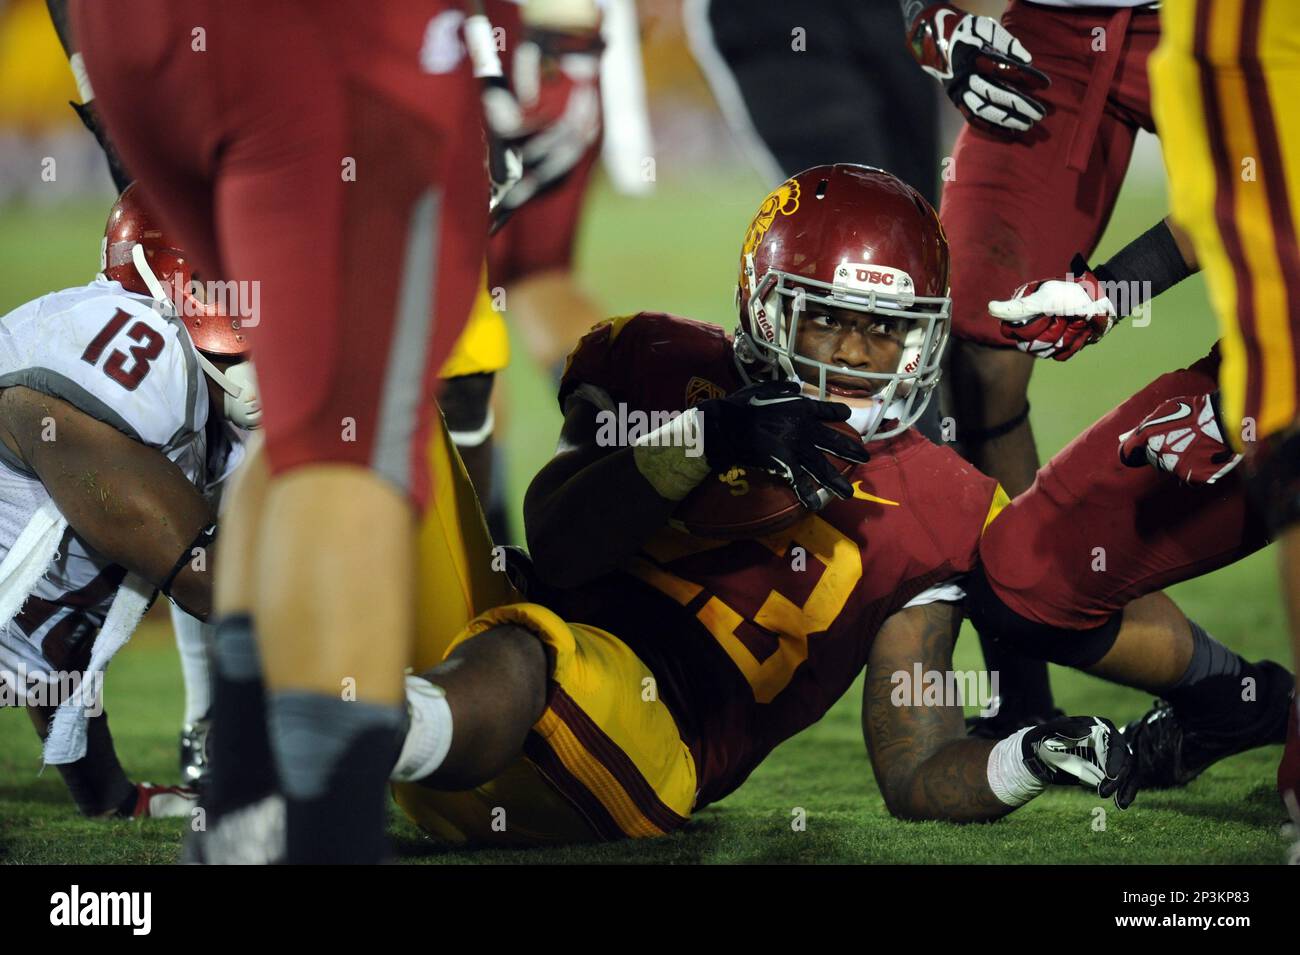 07 September 2013: USC (23) Tre Madden on the ground after being tackled  during an NCAA football game between the Washington State Cougars and the  USC Trojans at the Los Angeles Memorial